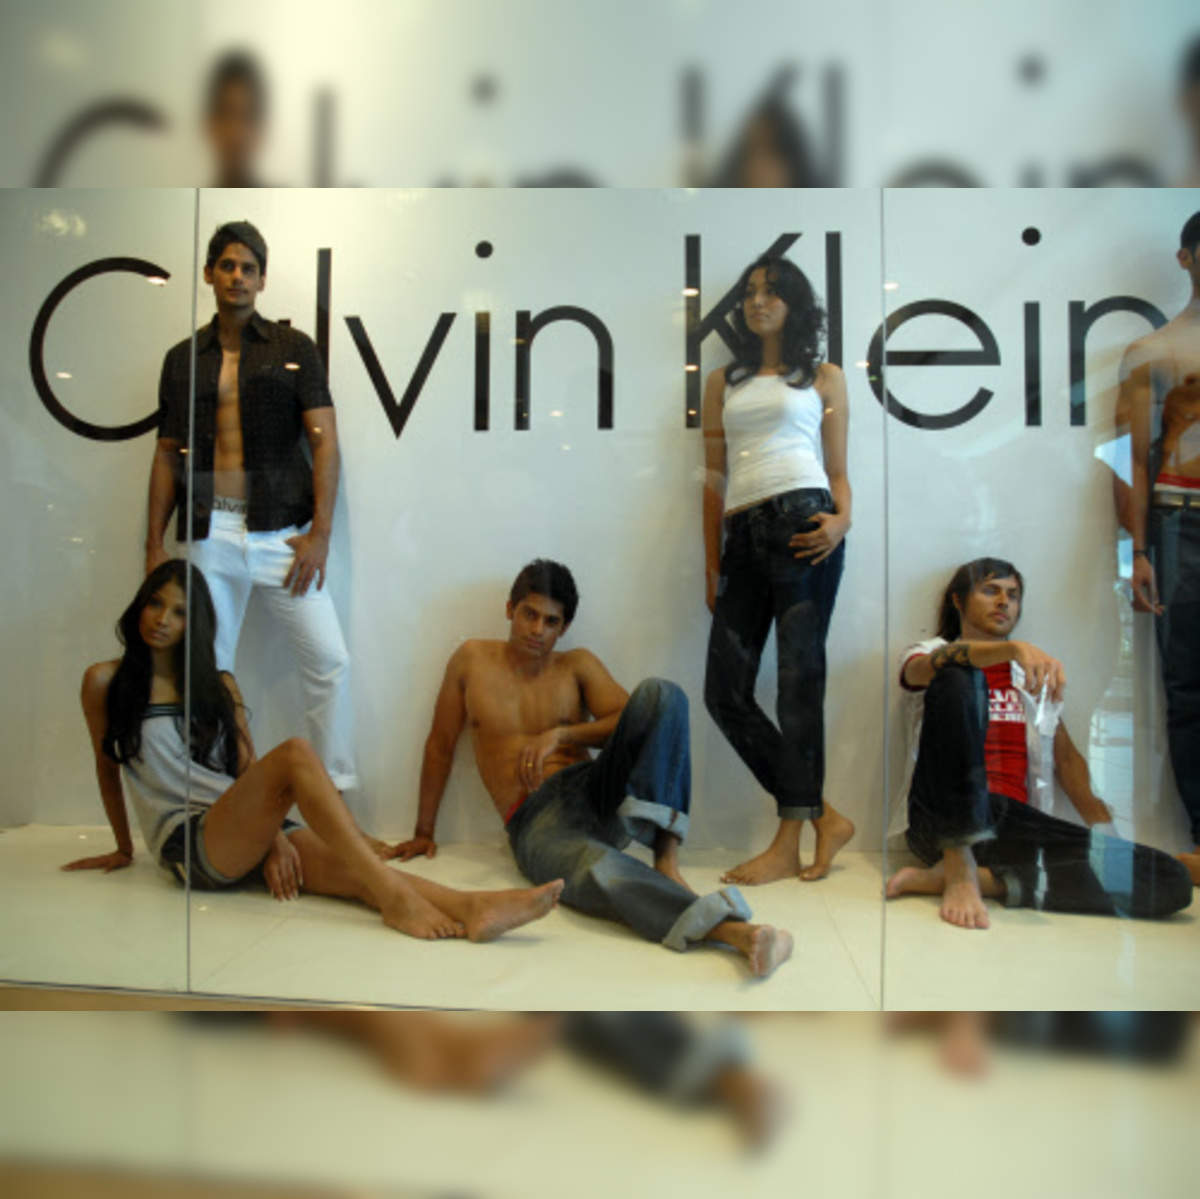 Arvind to market Calvin Klein brand products in India - The Economic Times